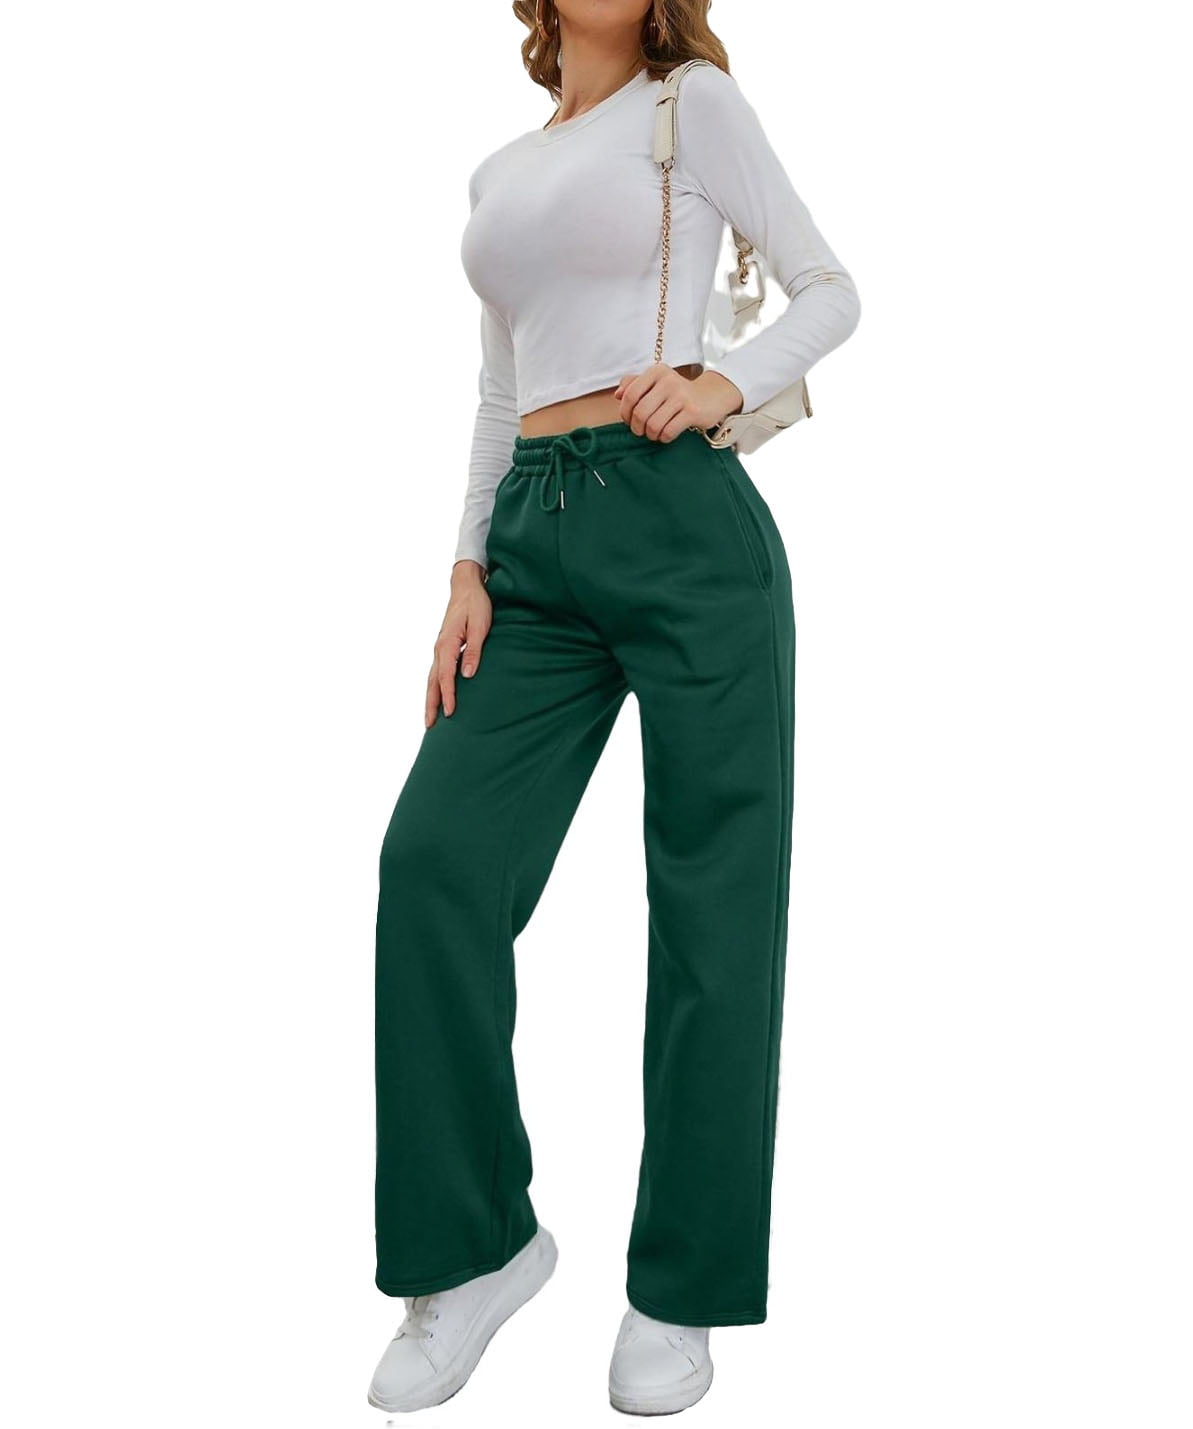  ERTUPE Womens High Waist Drawstring Sweatpants Wide Leg  Pocketed Long Yoga Pants Army Green : Clothing, Shoes & Jewelry